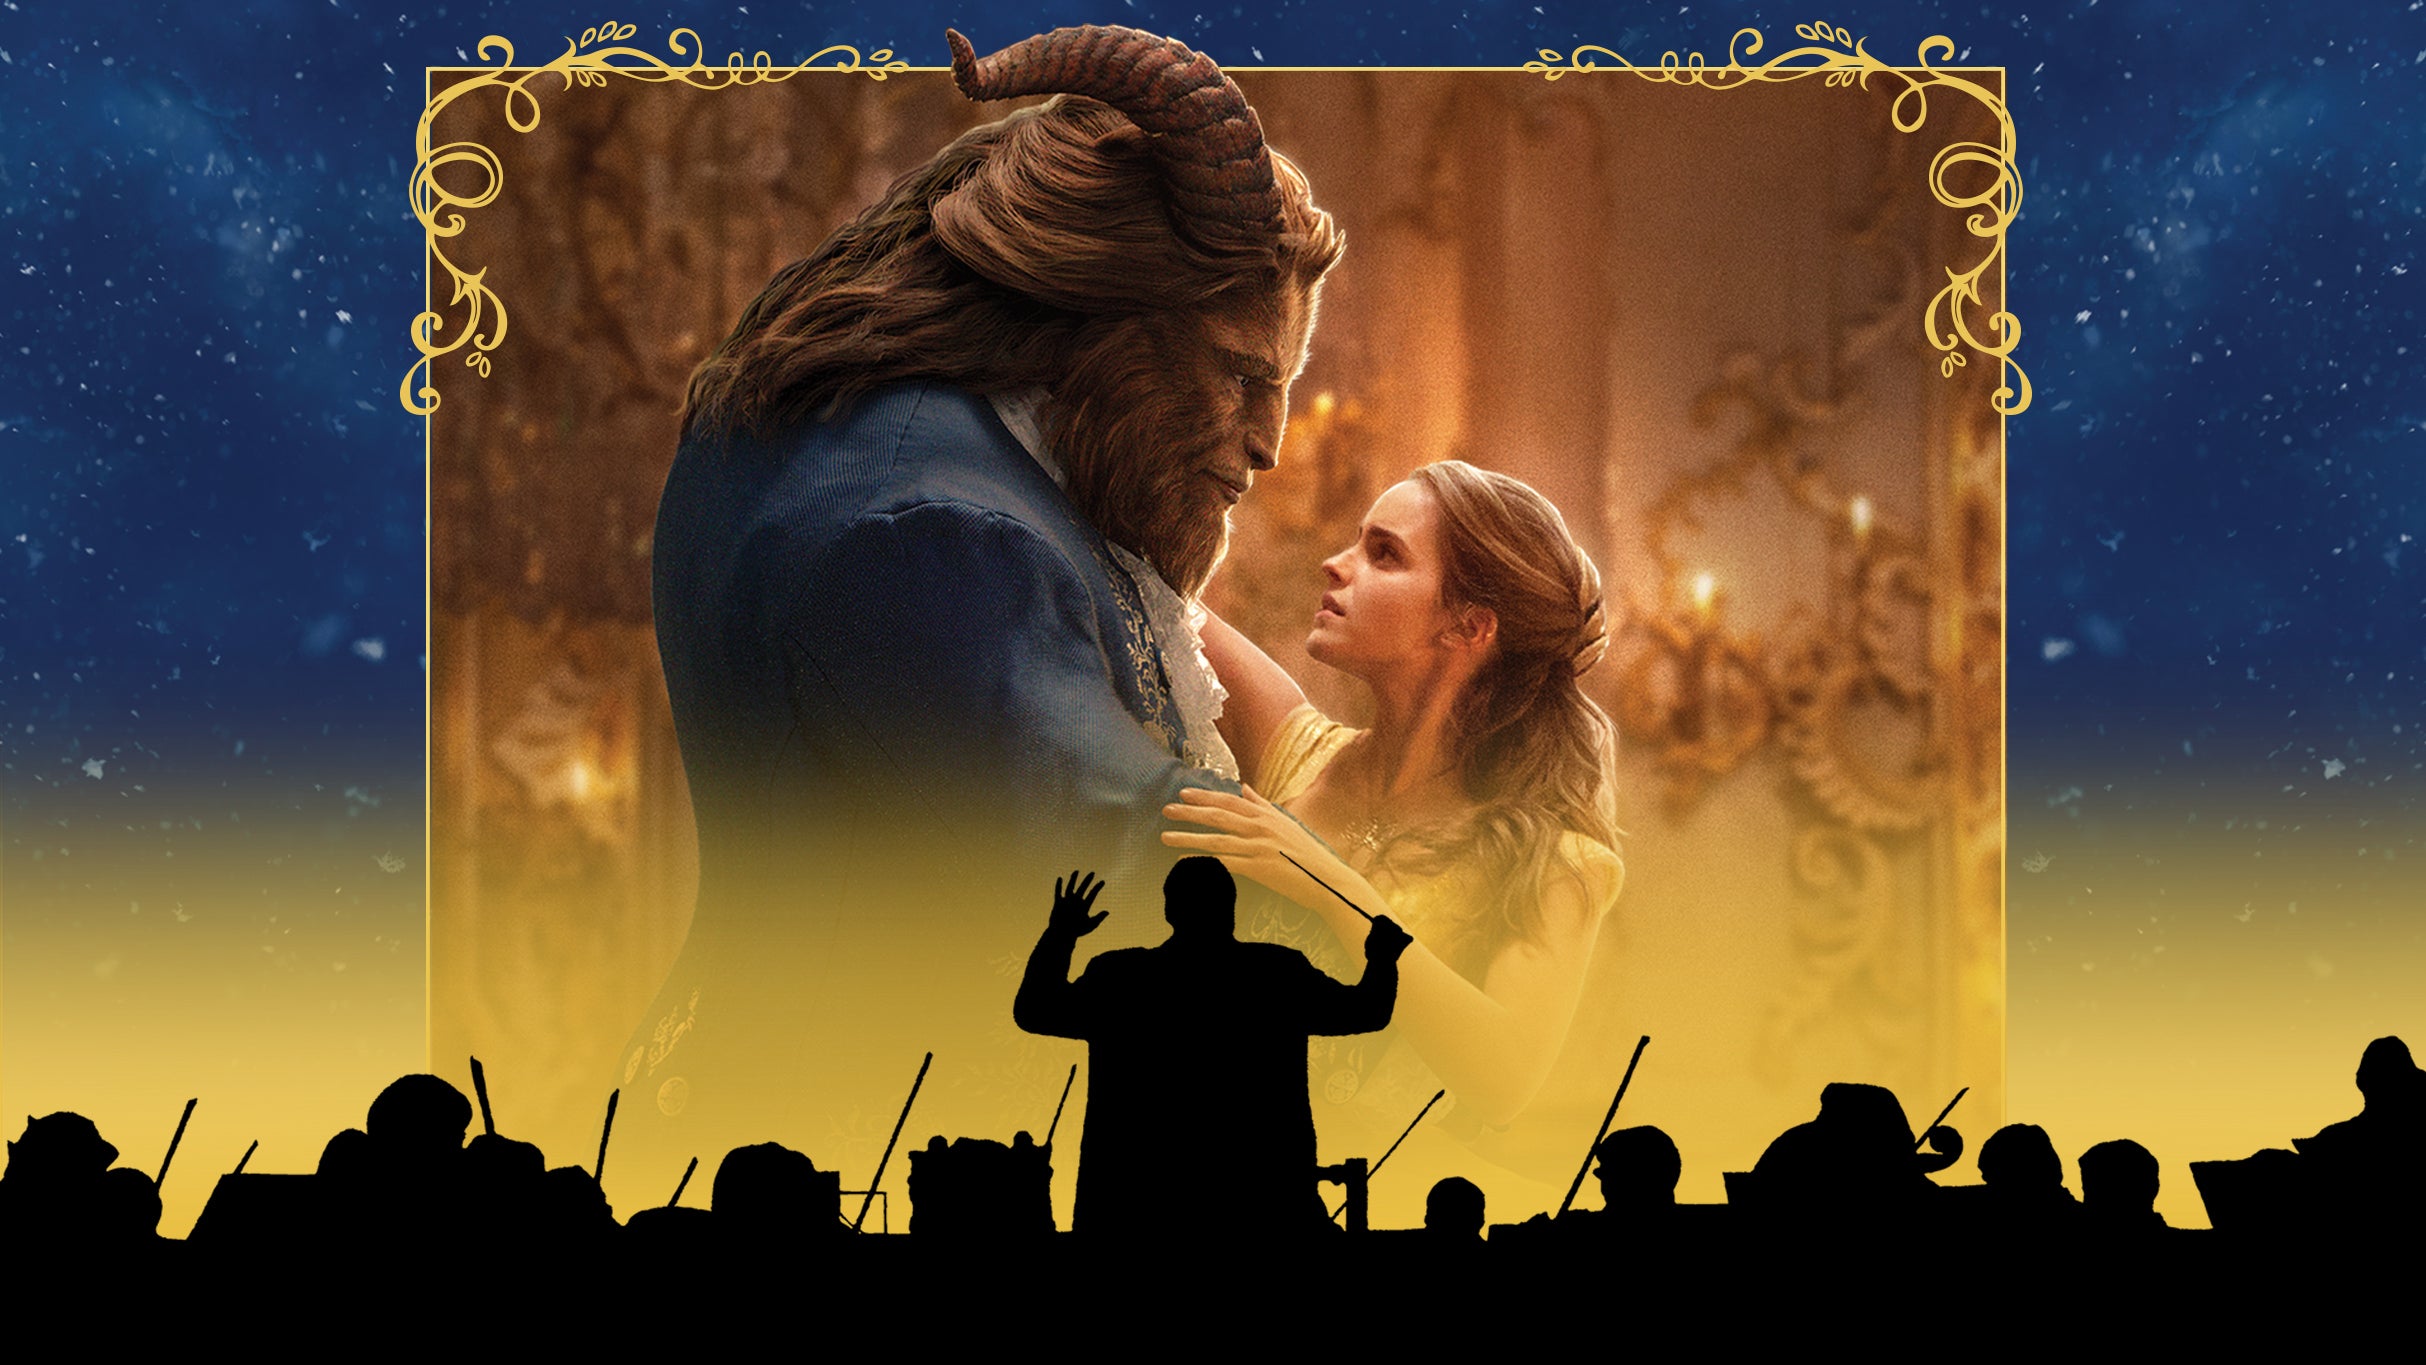 Disney In Concert: Beauty and the Beast Film with Live Orchestra